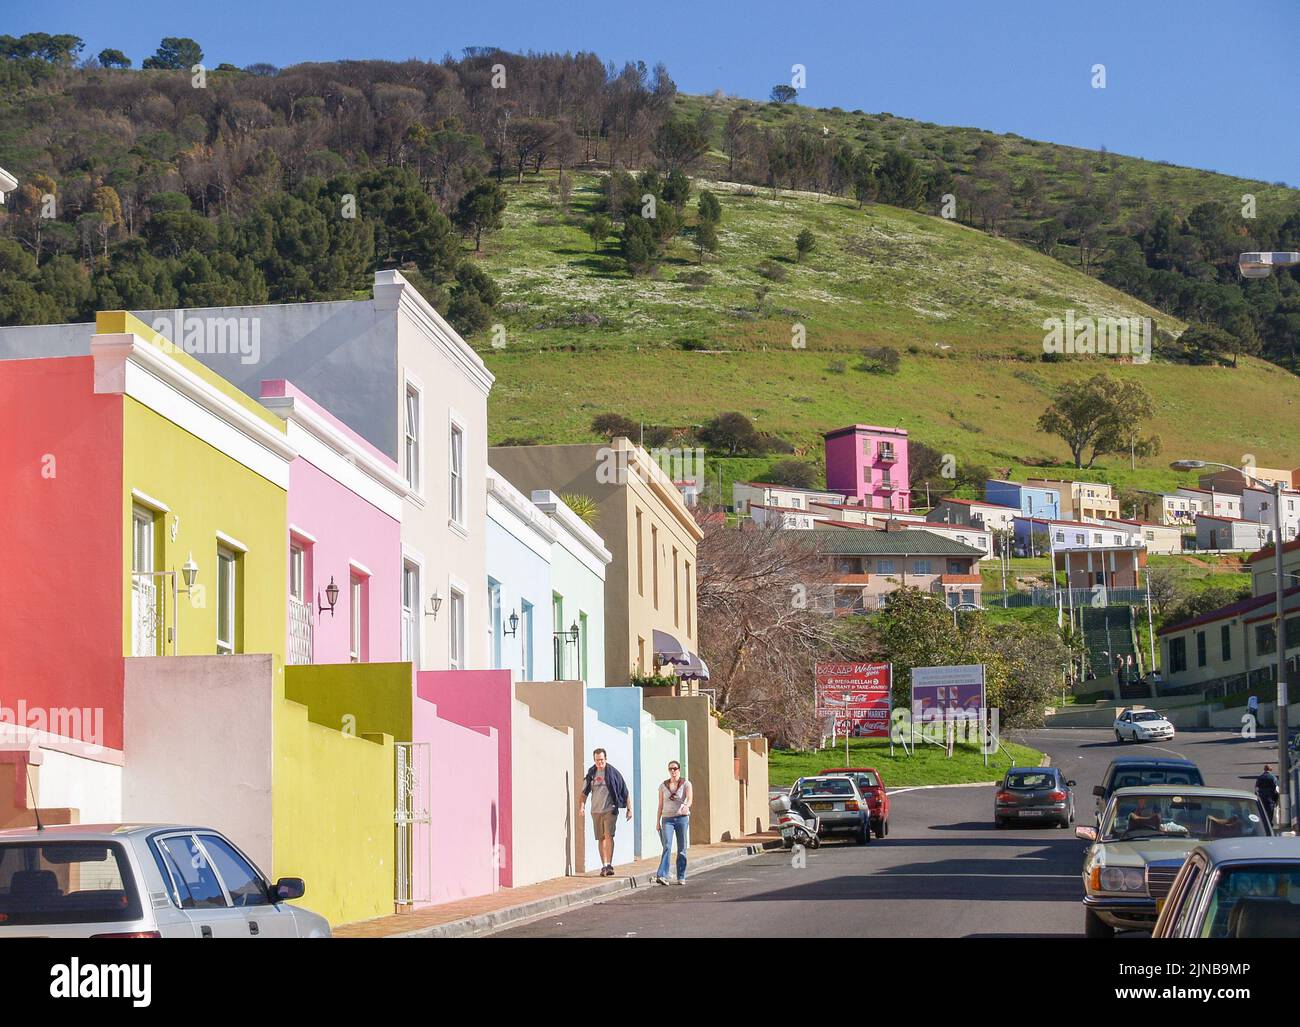 Cape Town South Africa - August 28 2007; Street of distinctive pastel colored buildings in district of Bo-Kaap below green hill in Cape Town. Stock Photo